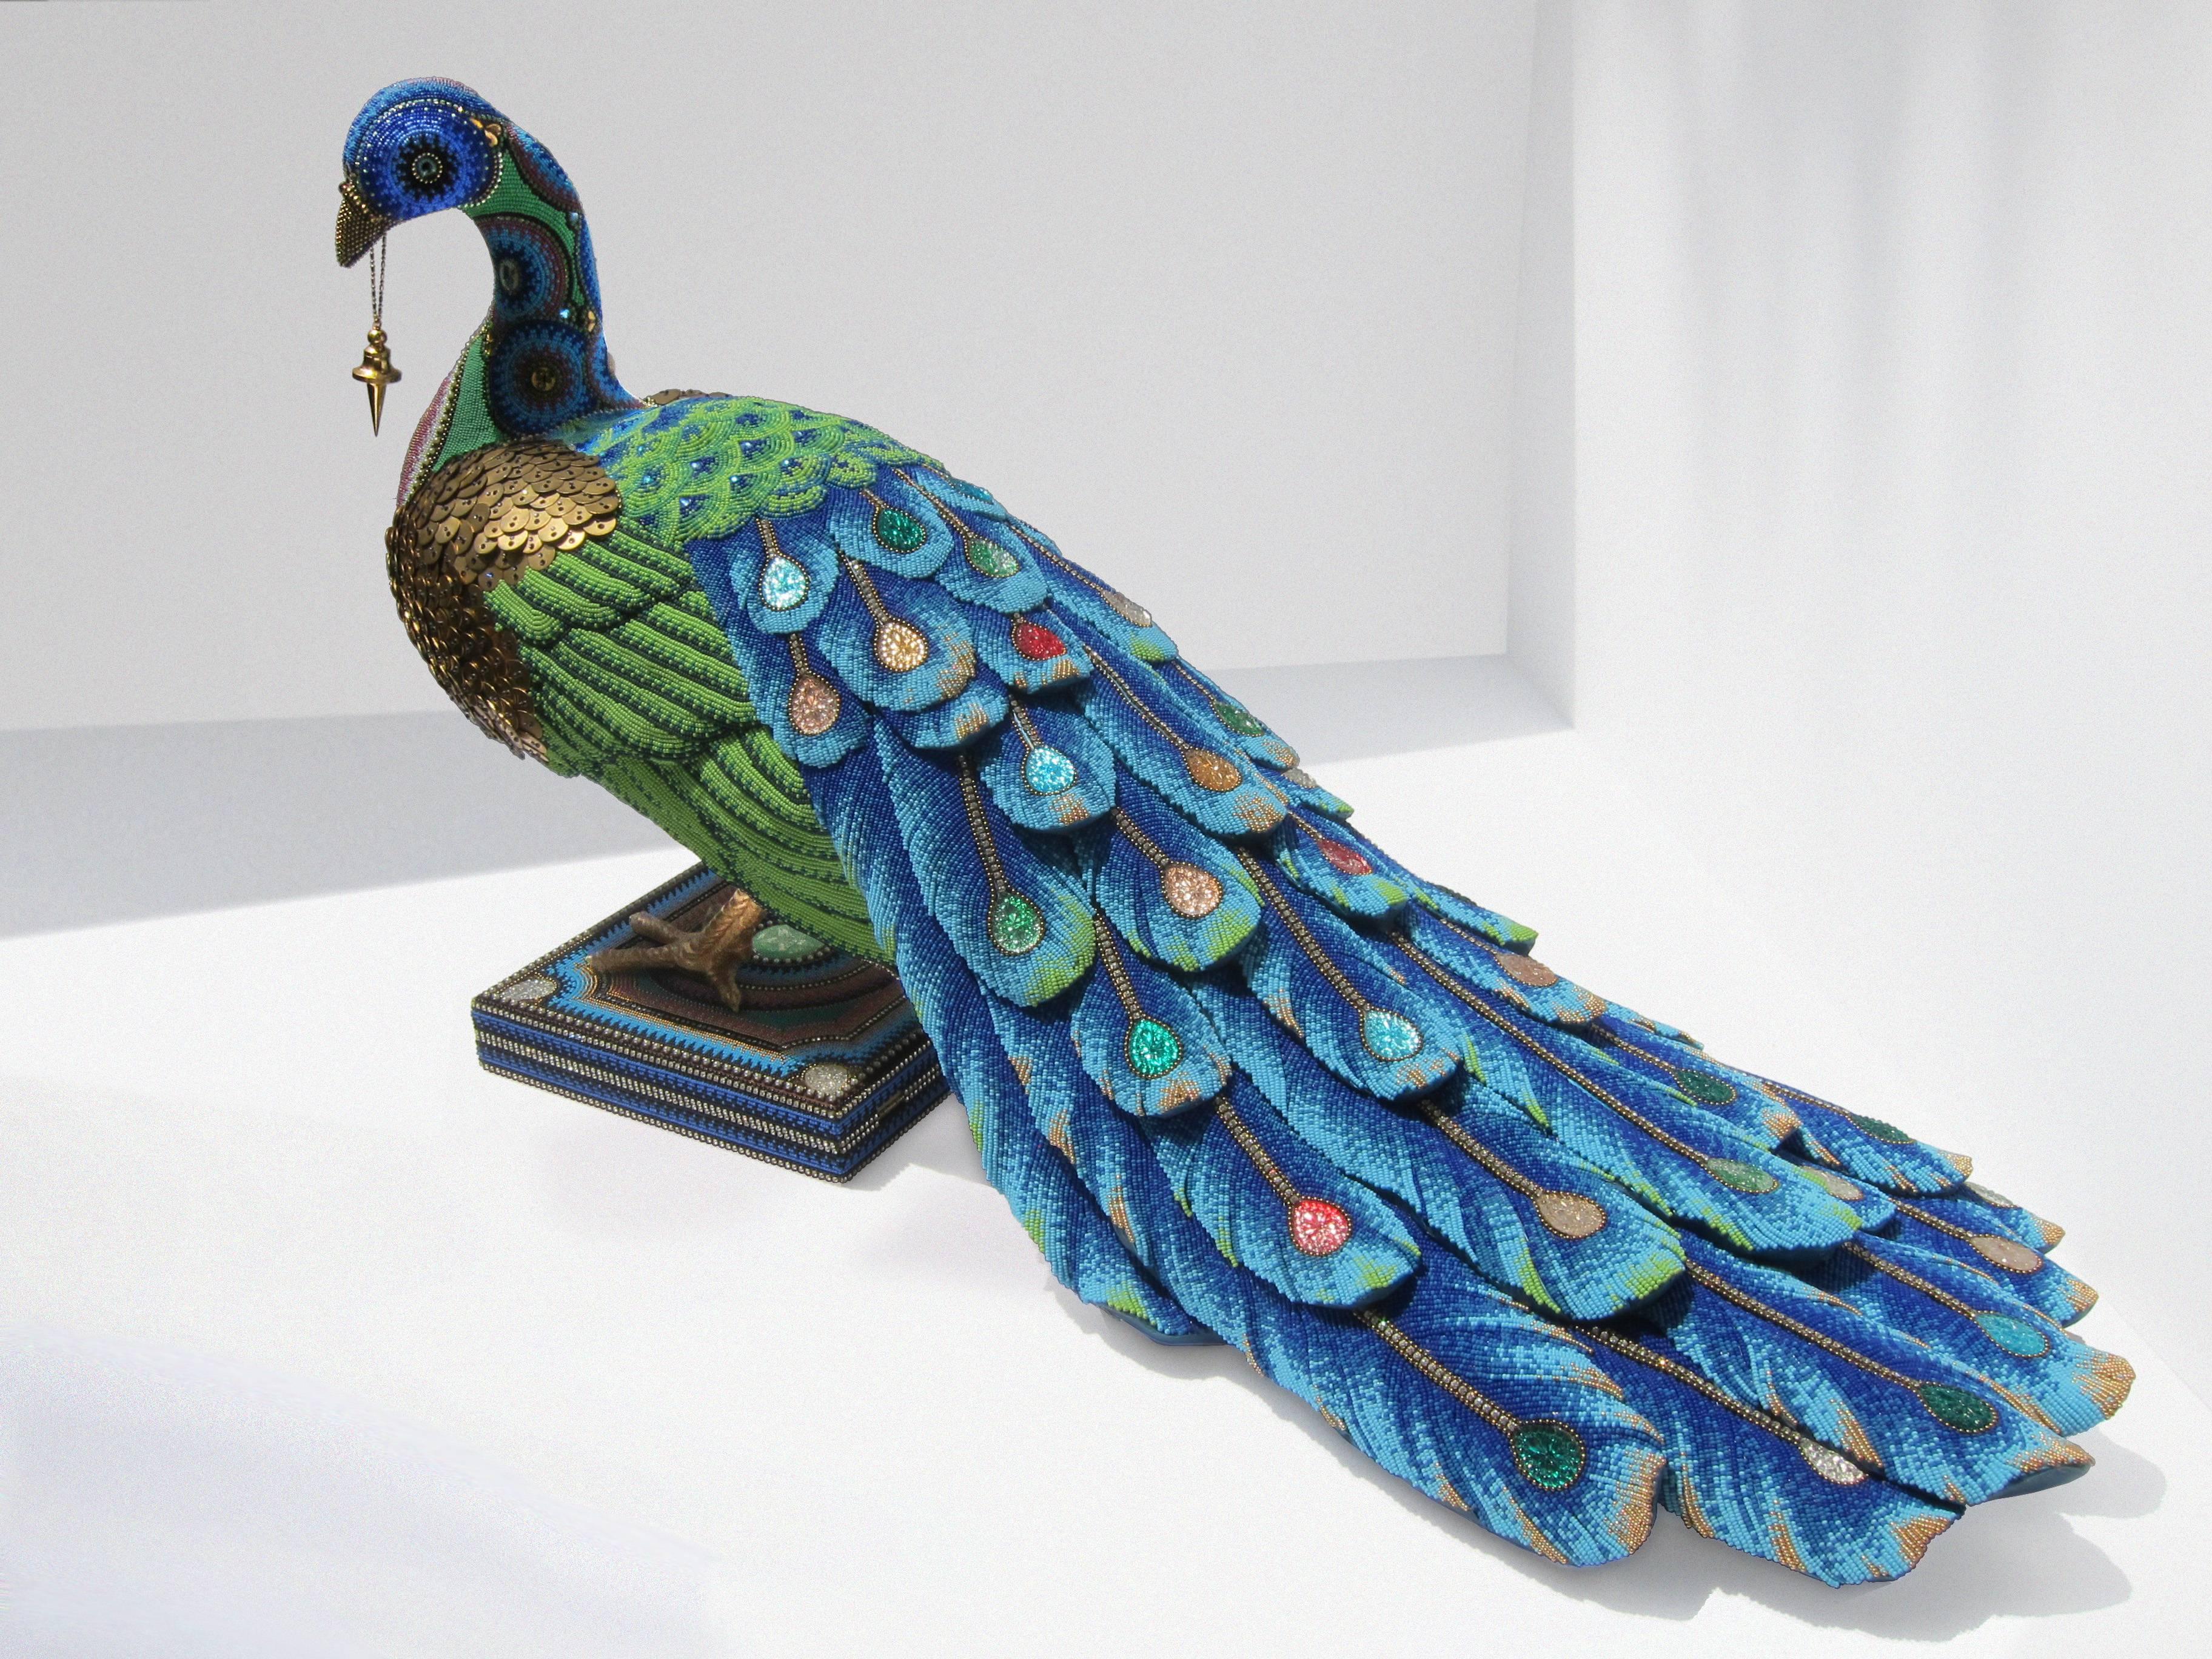 Contemporary Beaded Animal Sculpture, Glass Seed Beads on Mixed Media - Mixed Media Art by Jan Huling